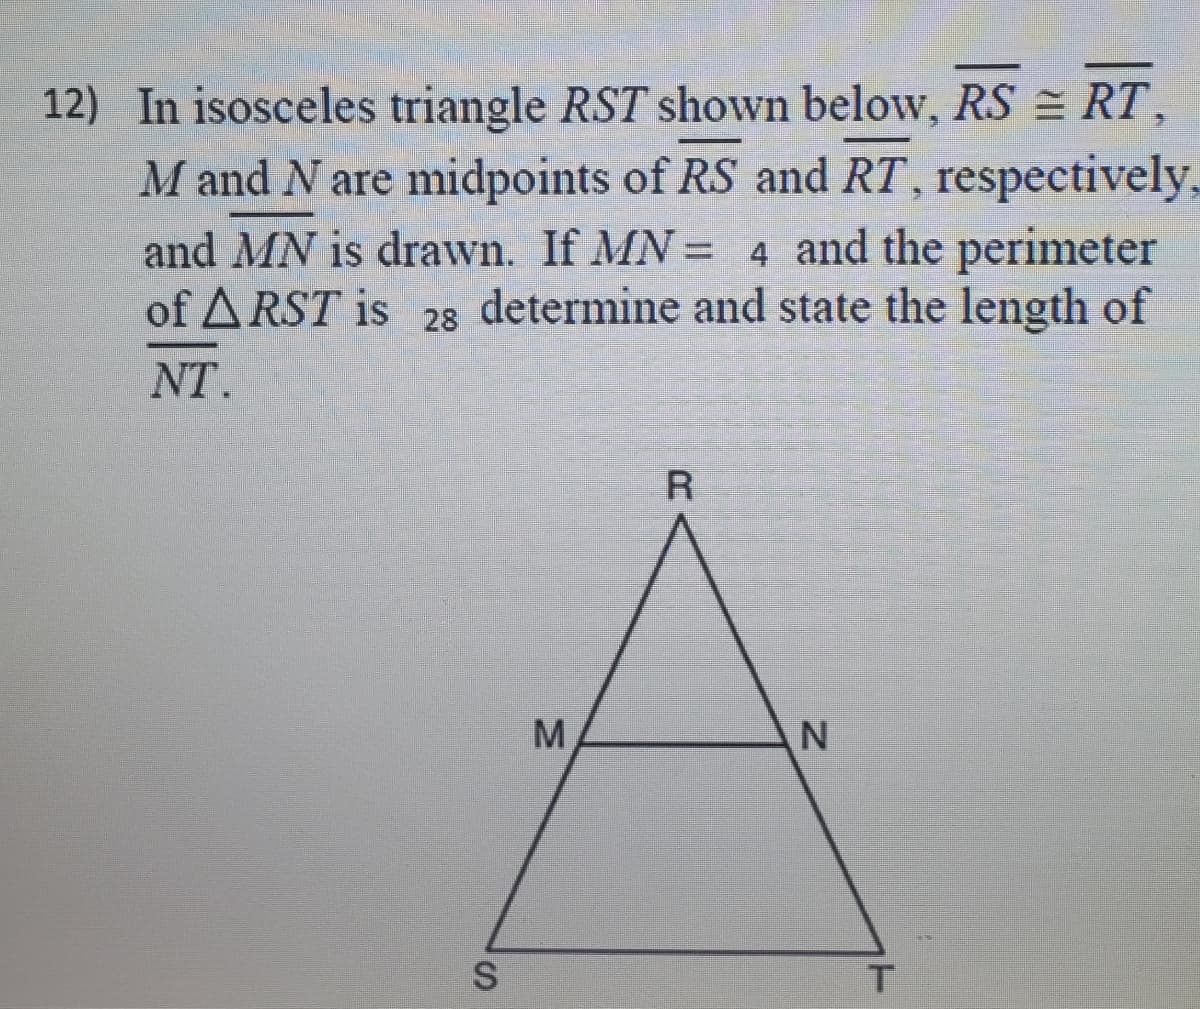 12) In isosceles triangle RST shown below, RS = RT,
M and N are midpoints of RS and RT, respectively,
and MN is drawn. If MN = 4 and the perimeter
of A RST is 28 determine and state the length of
%3D
NT.
M.
